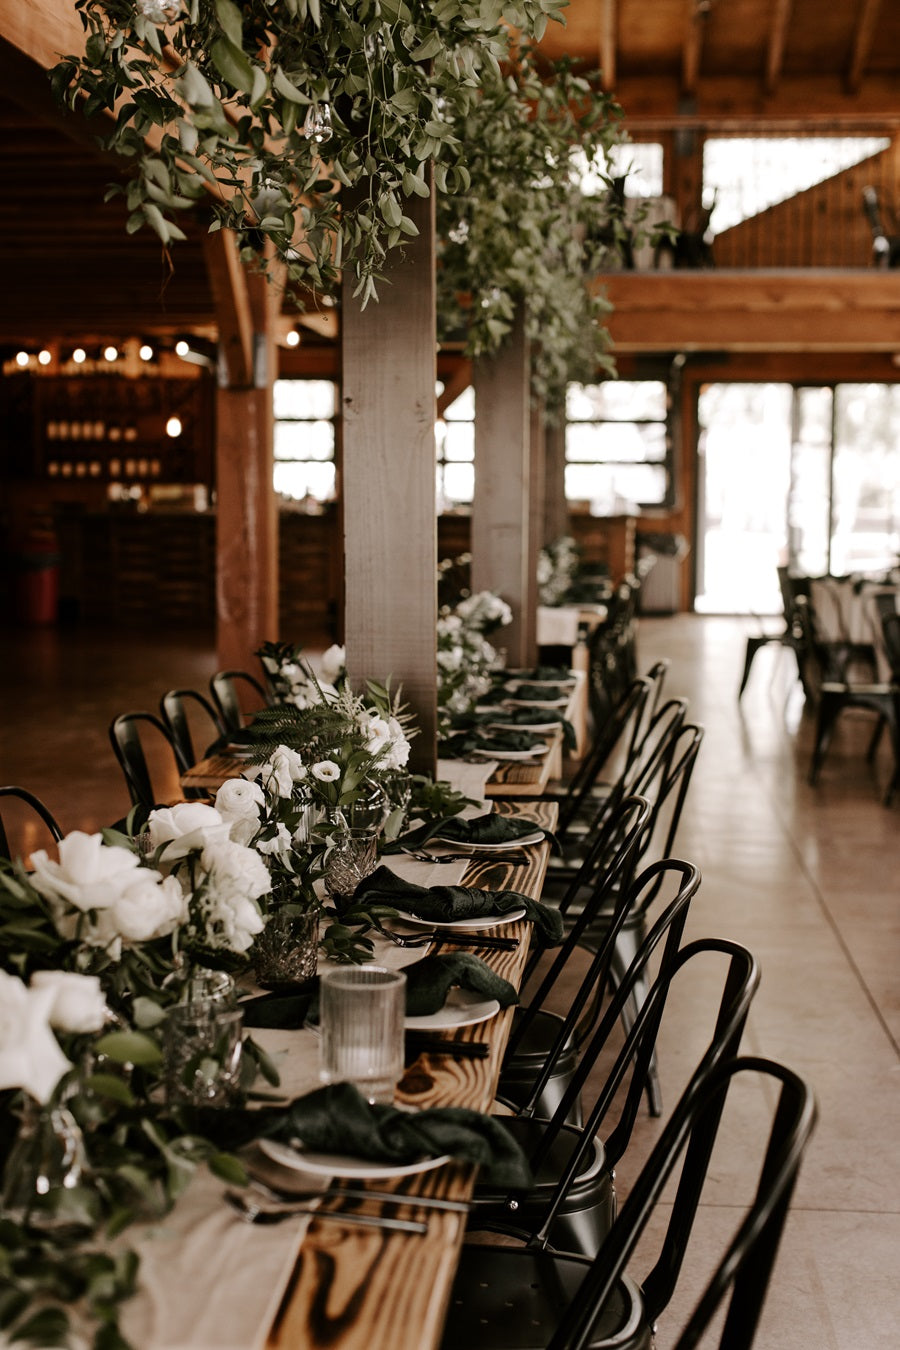 Table setting shot showing the low floral centerpieces and the centerpiece with greenery on a pedestal above the table.